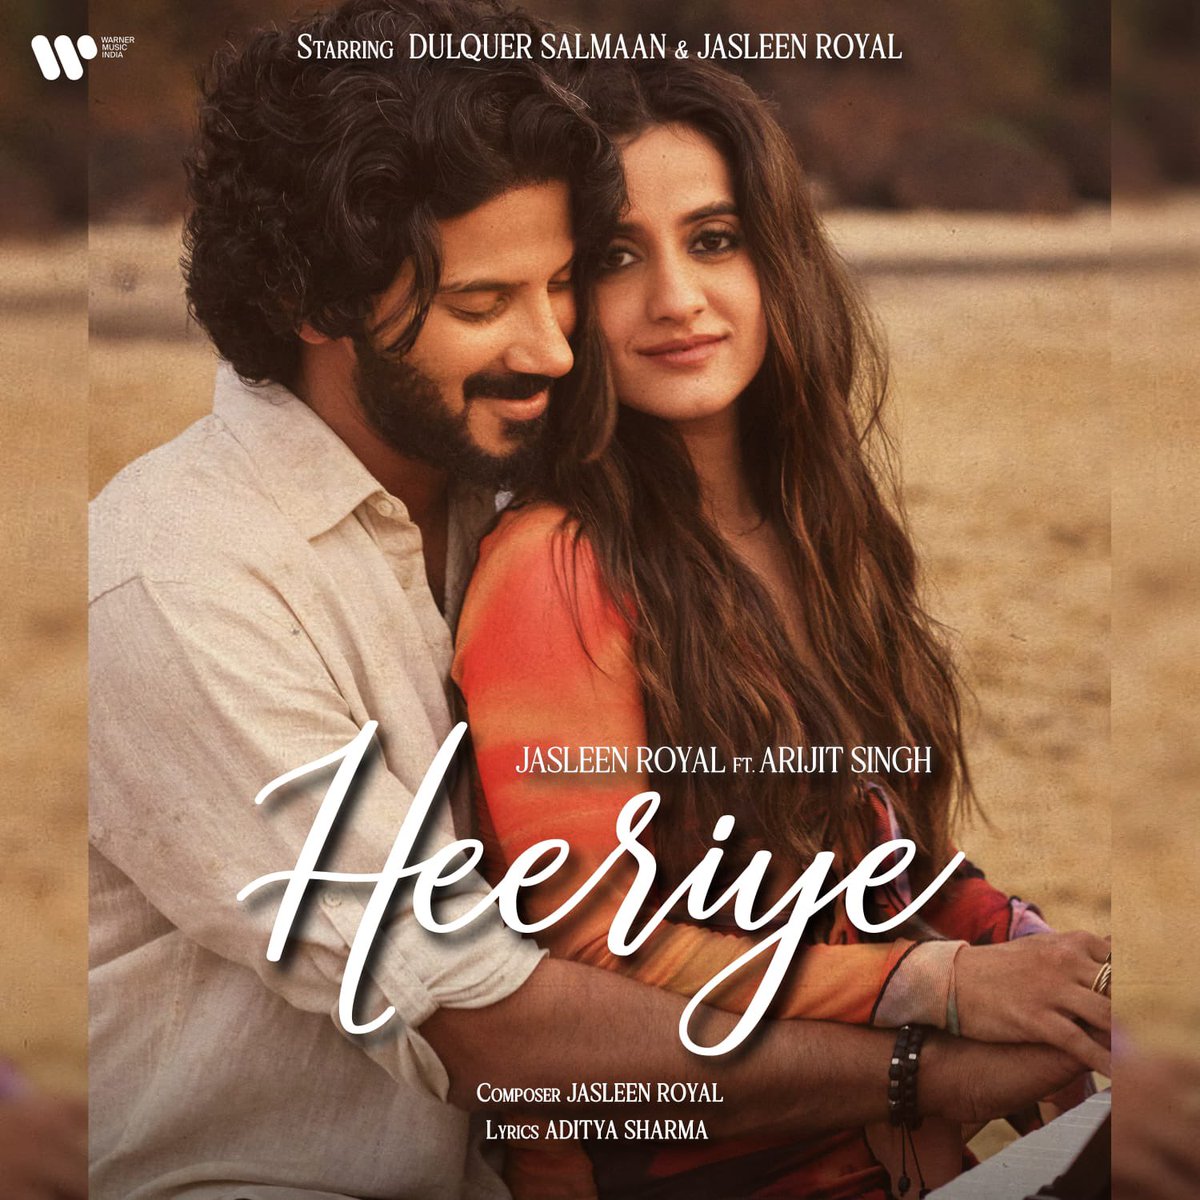 BEST #ARIJITSINGH ROMANTIC 🌹 SONG OF 2023

LIKE ❤️ for #PhirAurKyaChahiye by #SachinJigar with #VickyKaushal 

REPOST 🔁 for #Heeriye by #JasleenRoyal with #DulquerSalmaan 

Any other romantic Arijit songs that are better than these two? Comment 👇